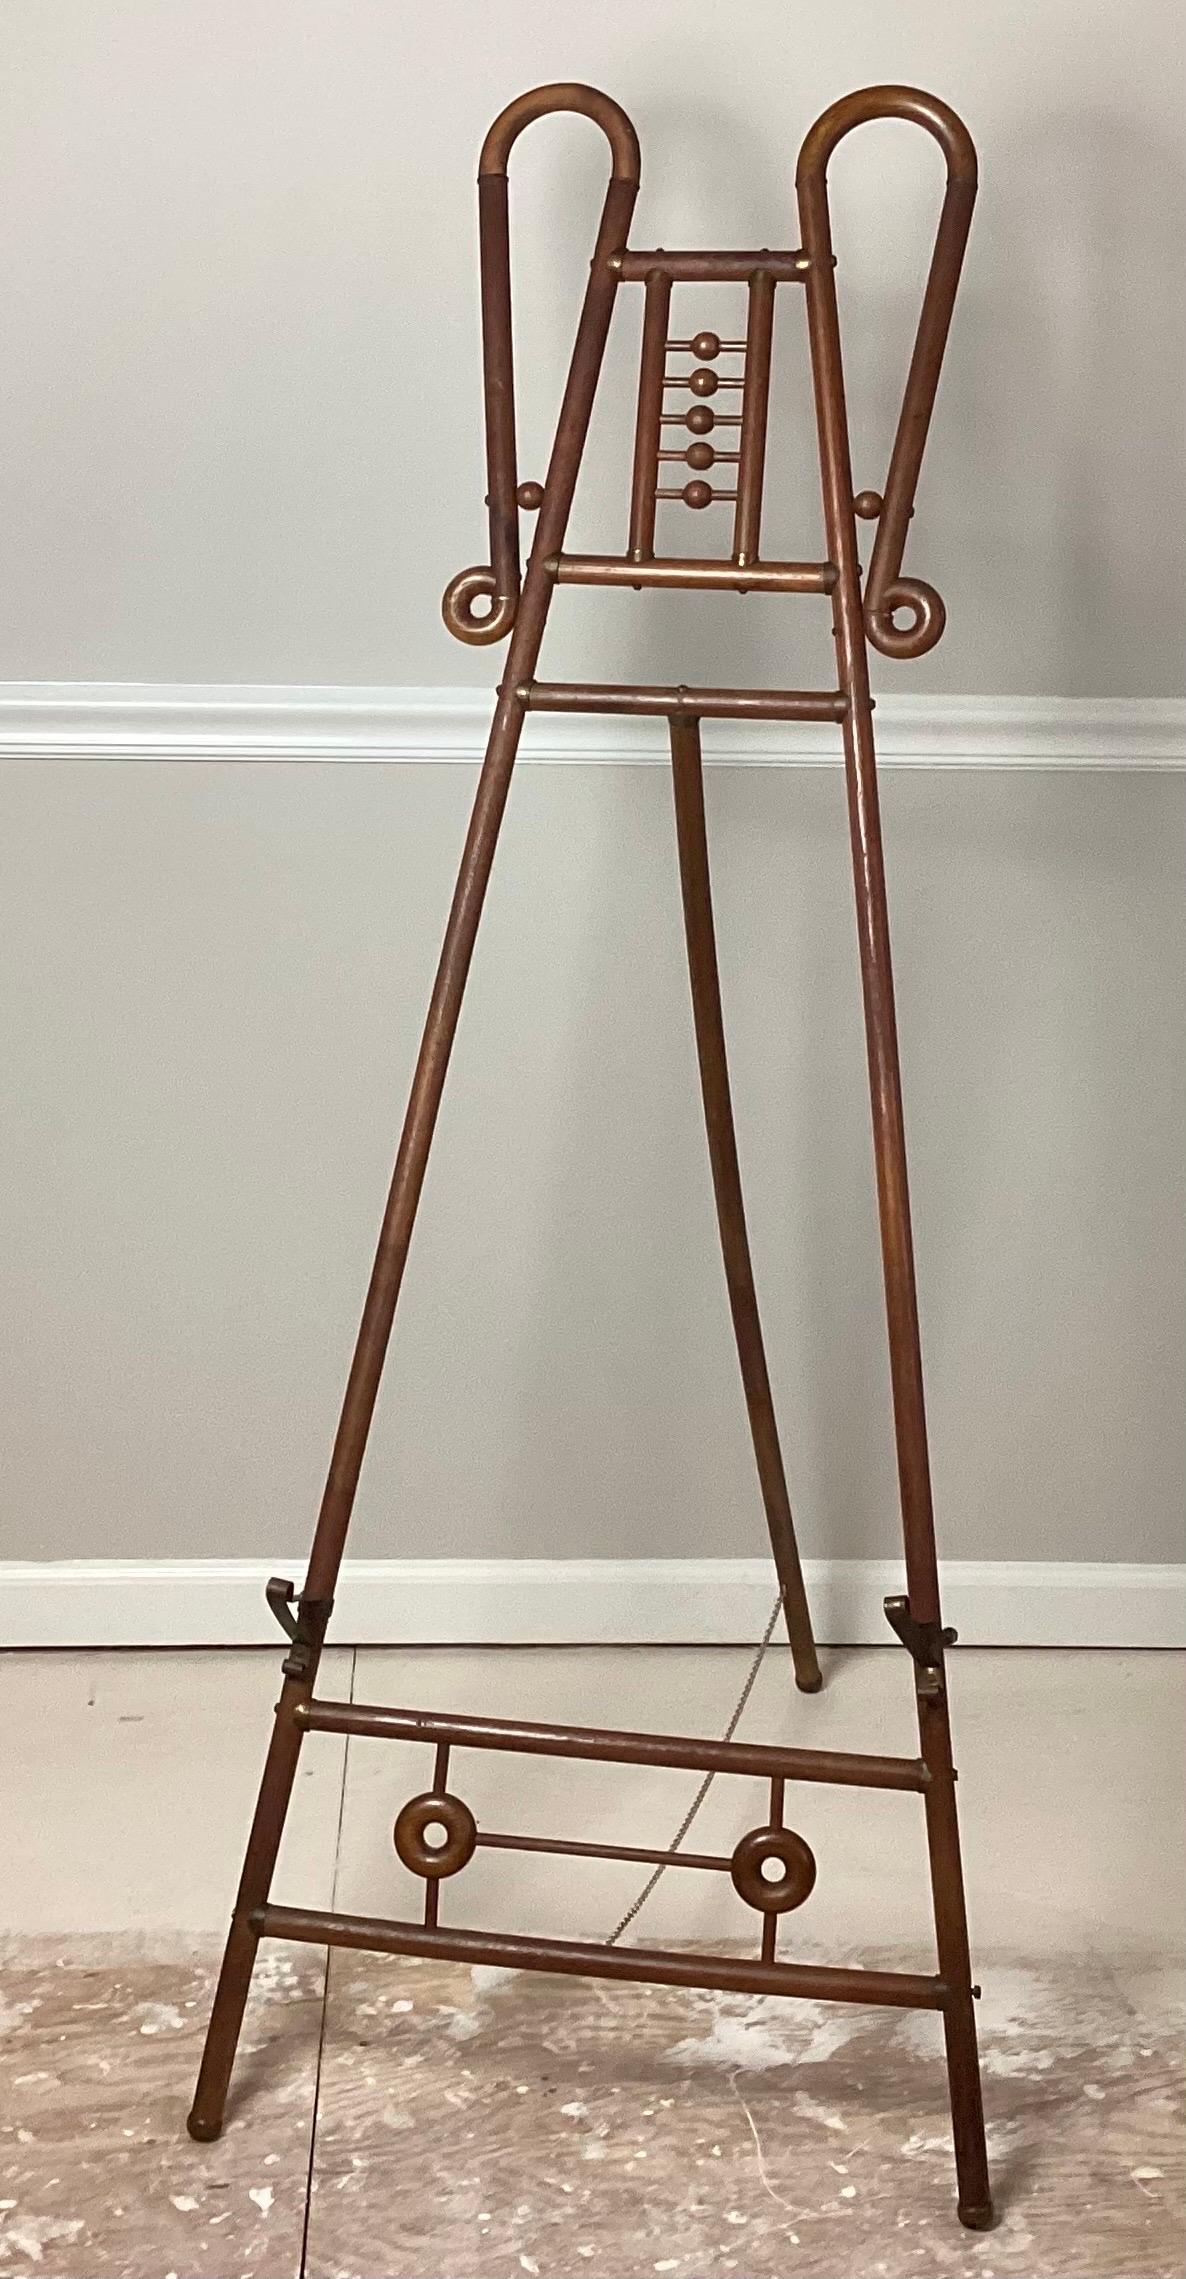 American Victorian Aesthetic Movement Style Bentwood Art Easel For Sale